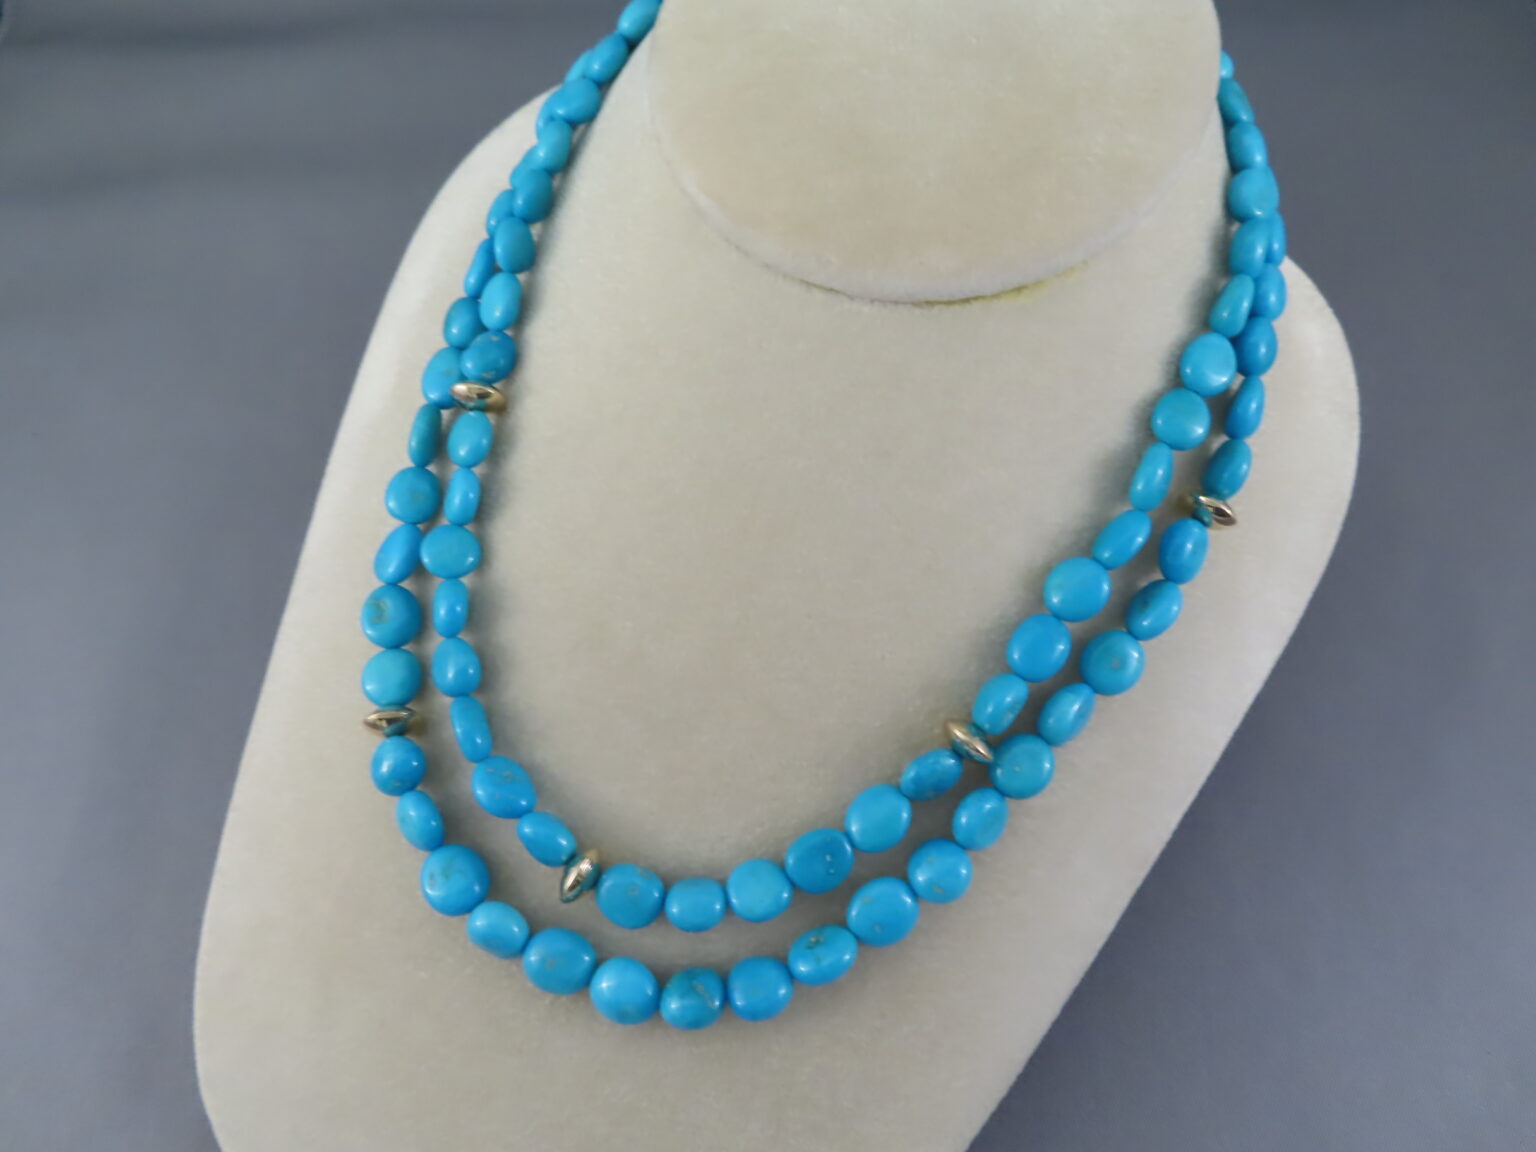 Native American Necklaces For Sale | American Indian Necklaces